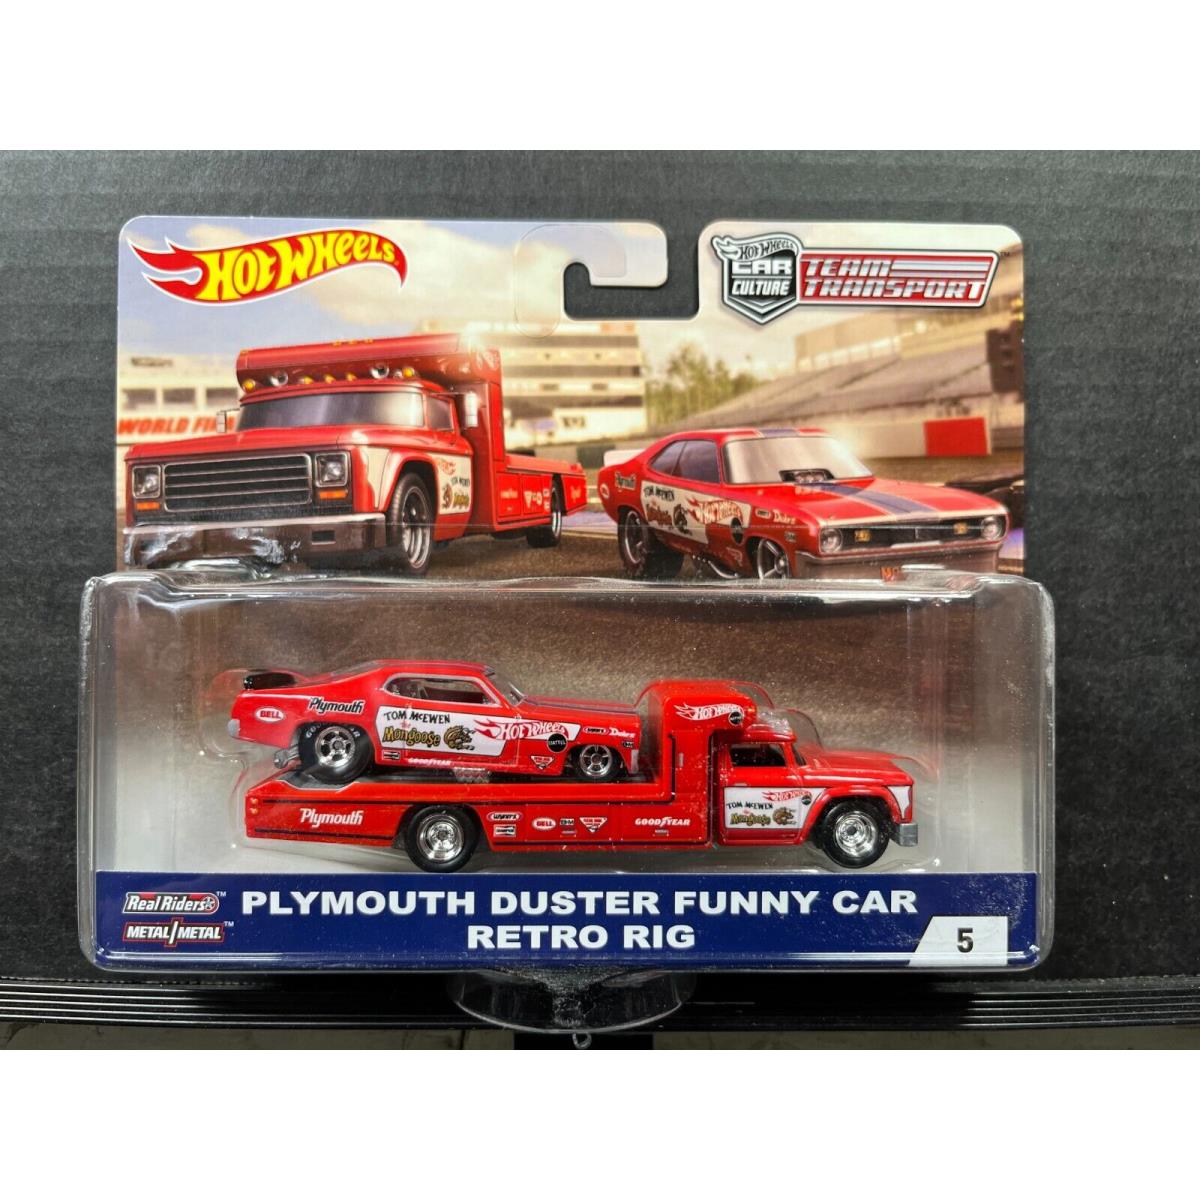 1/64 Hot Wheels Team Transport Plymouth Duster Funny Car Retro Rig The Mongoose